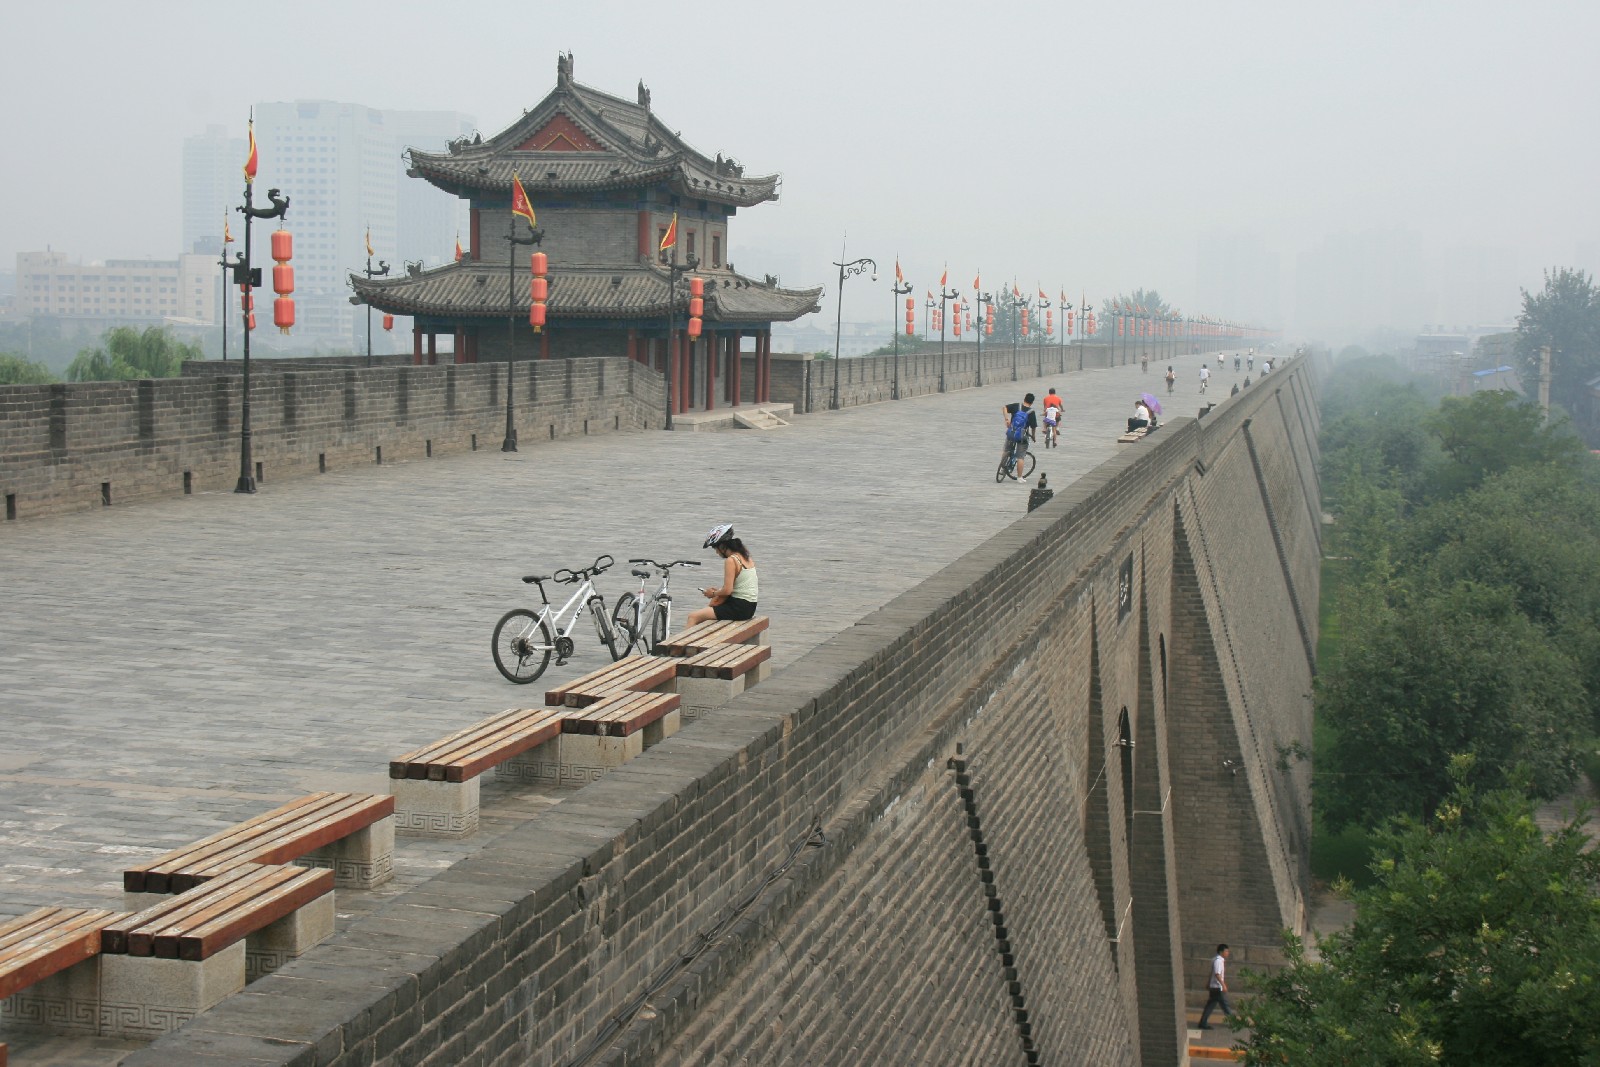 Pictures from China by otto leholt